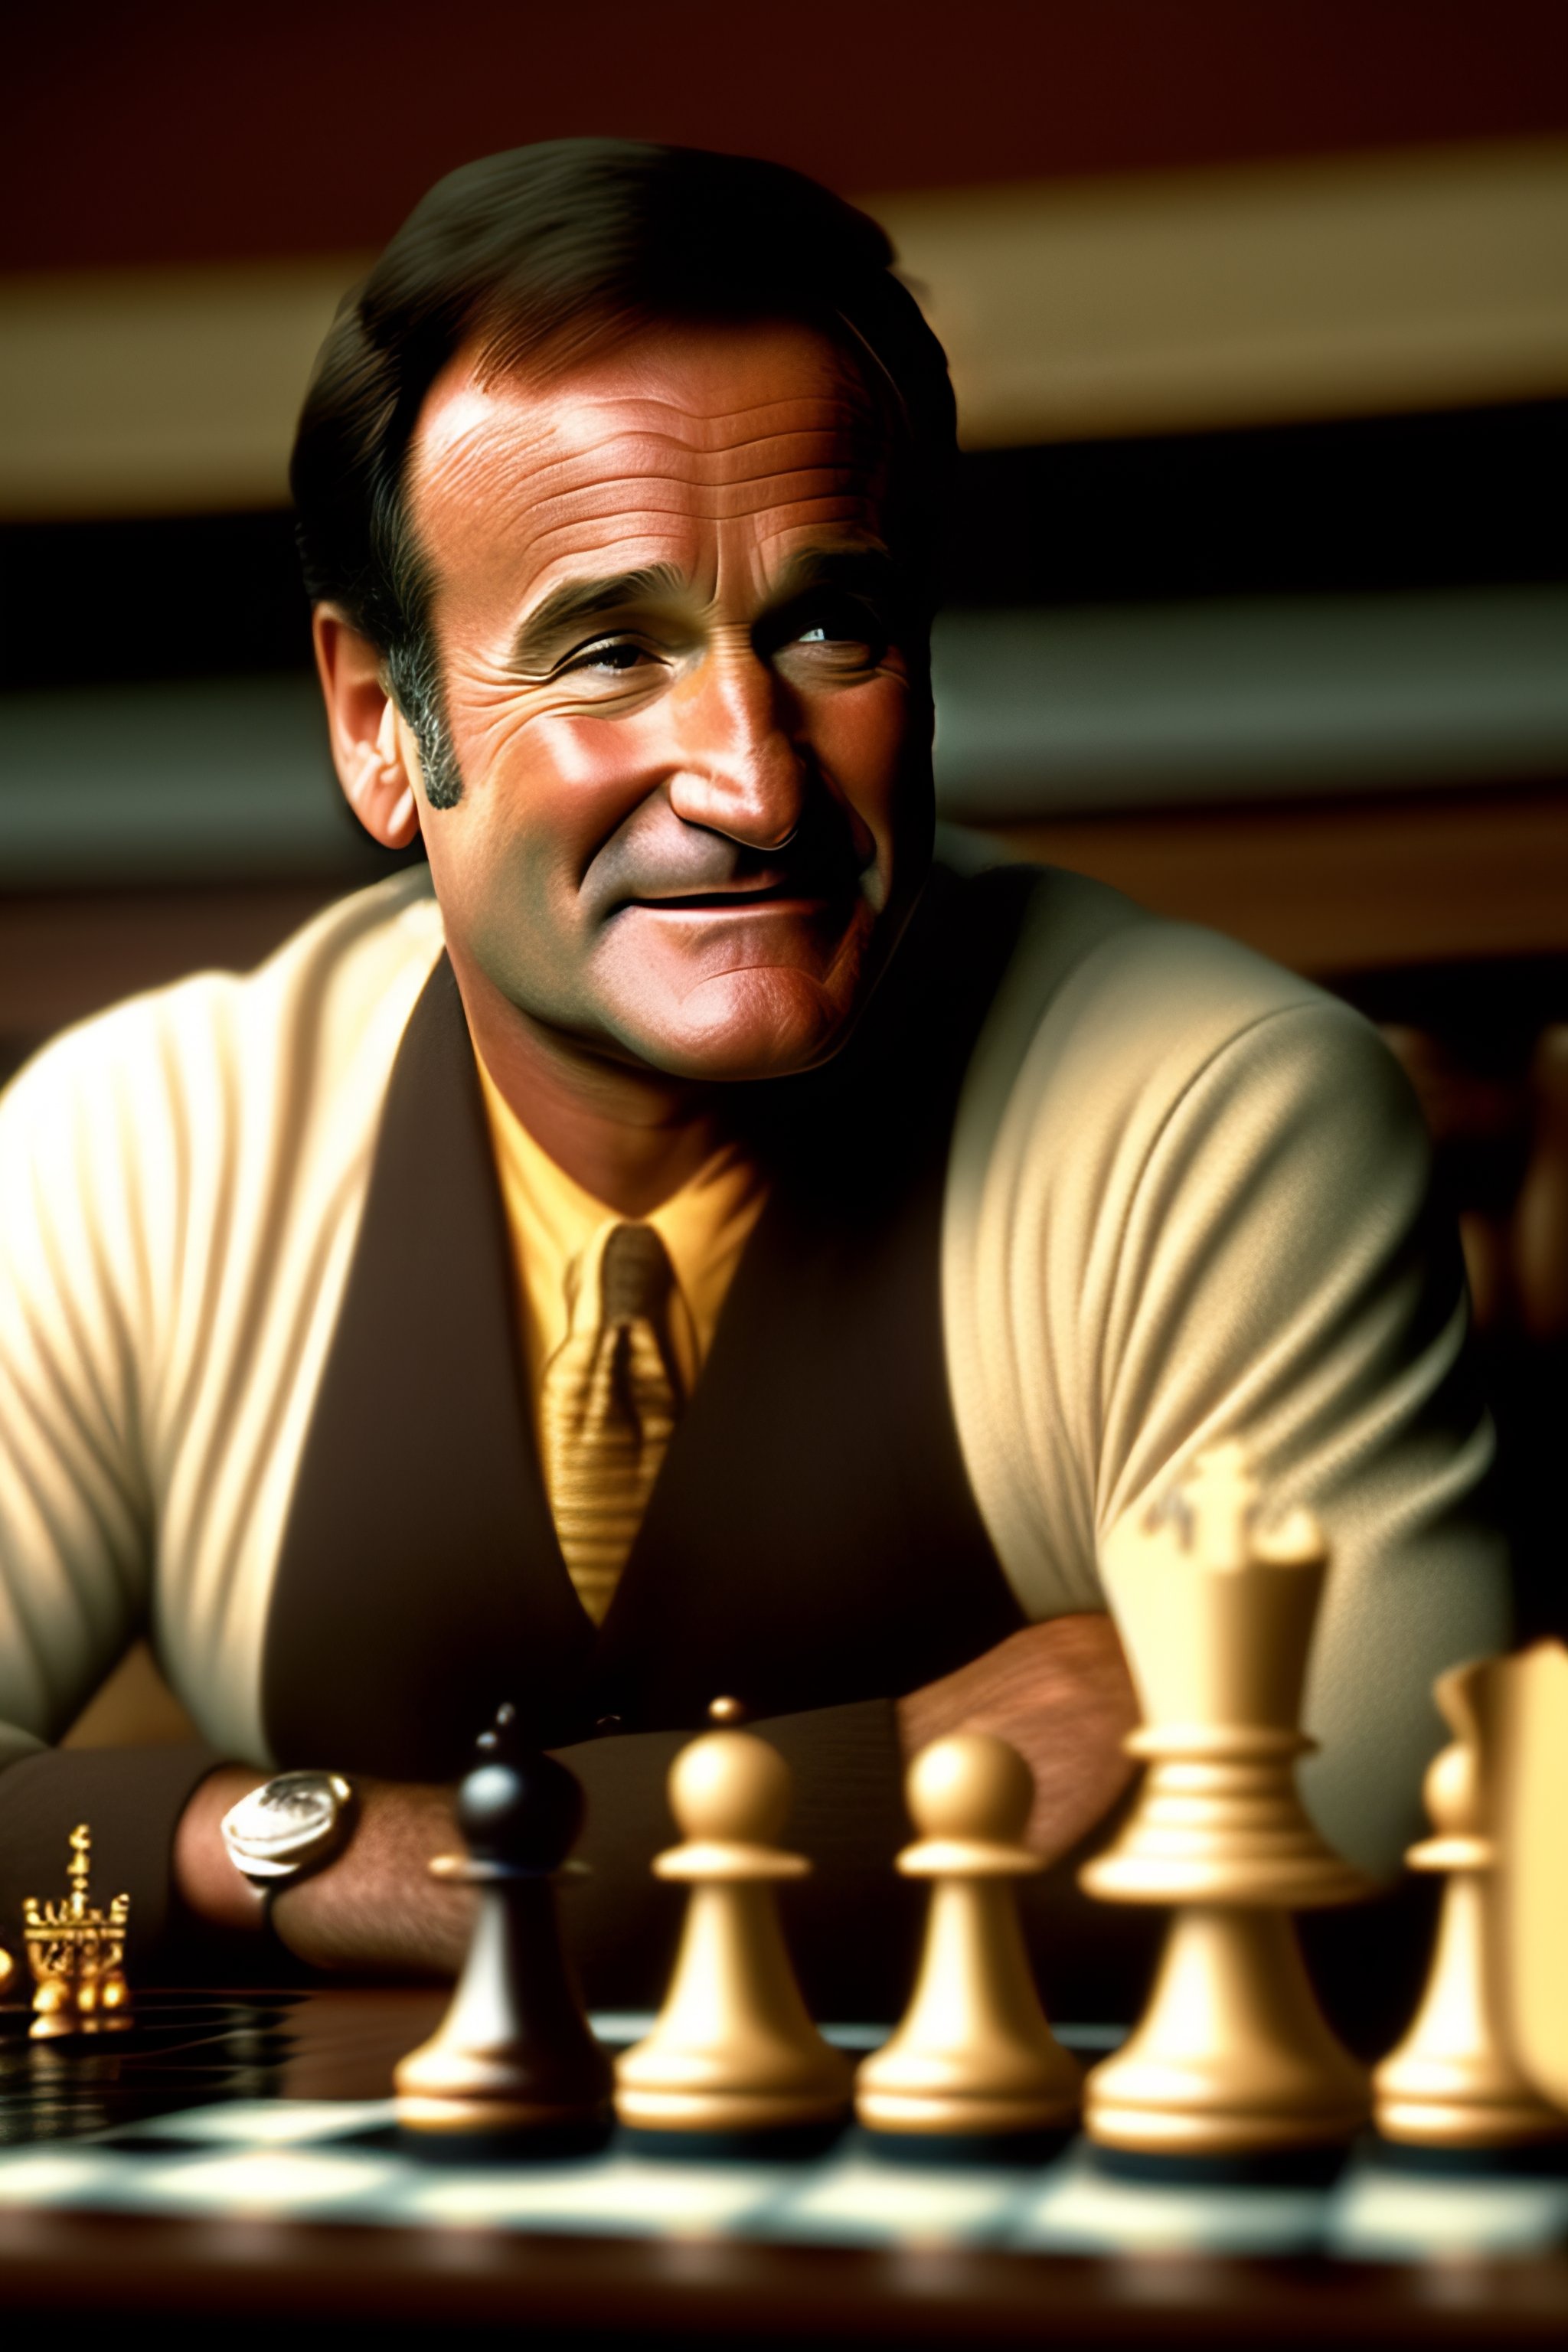 Lexica - Robin williams playing chess in a movie scene